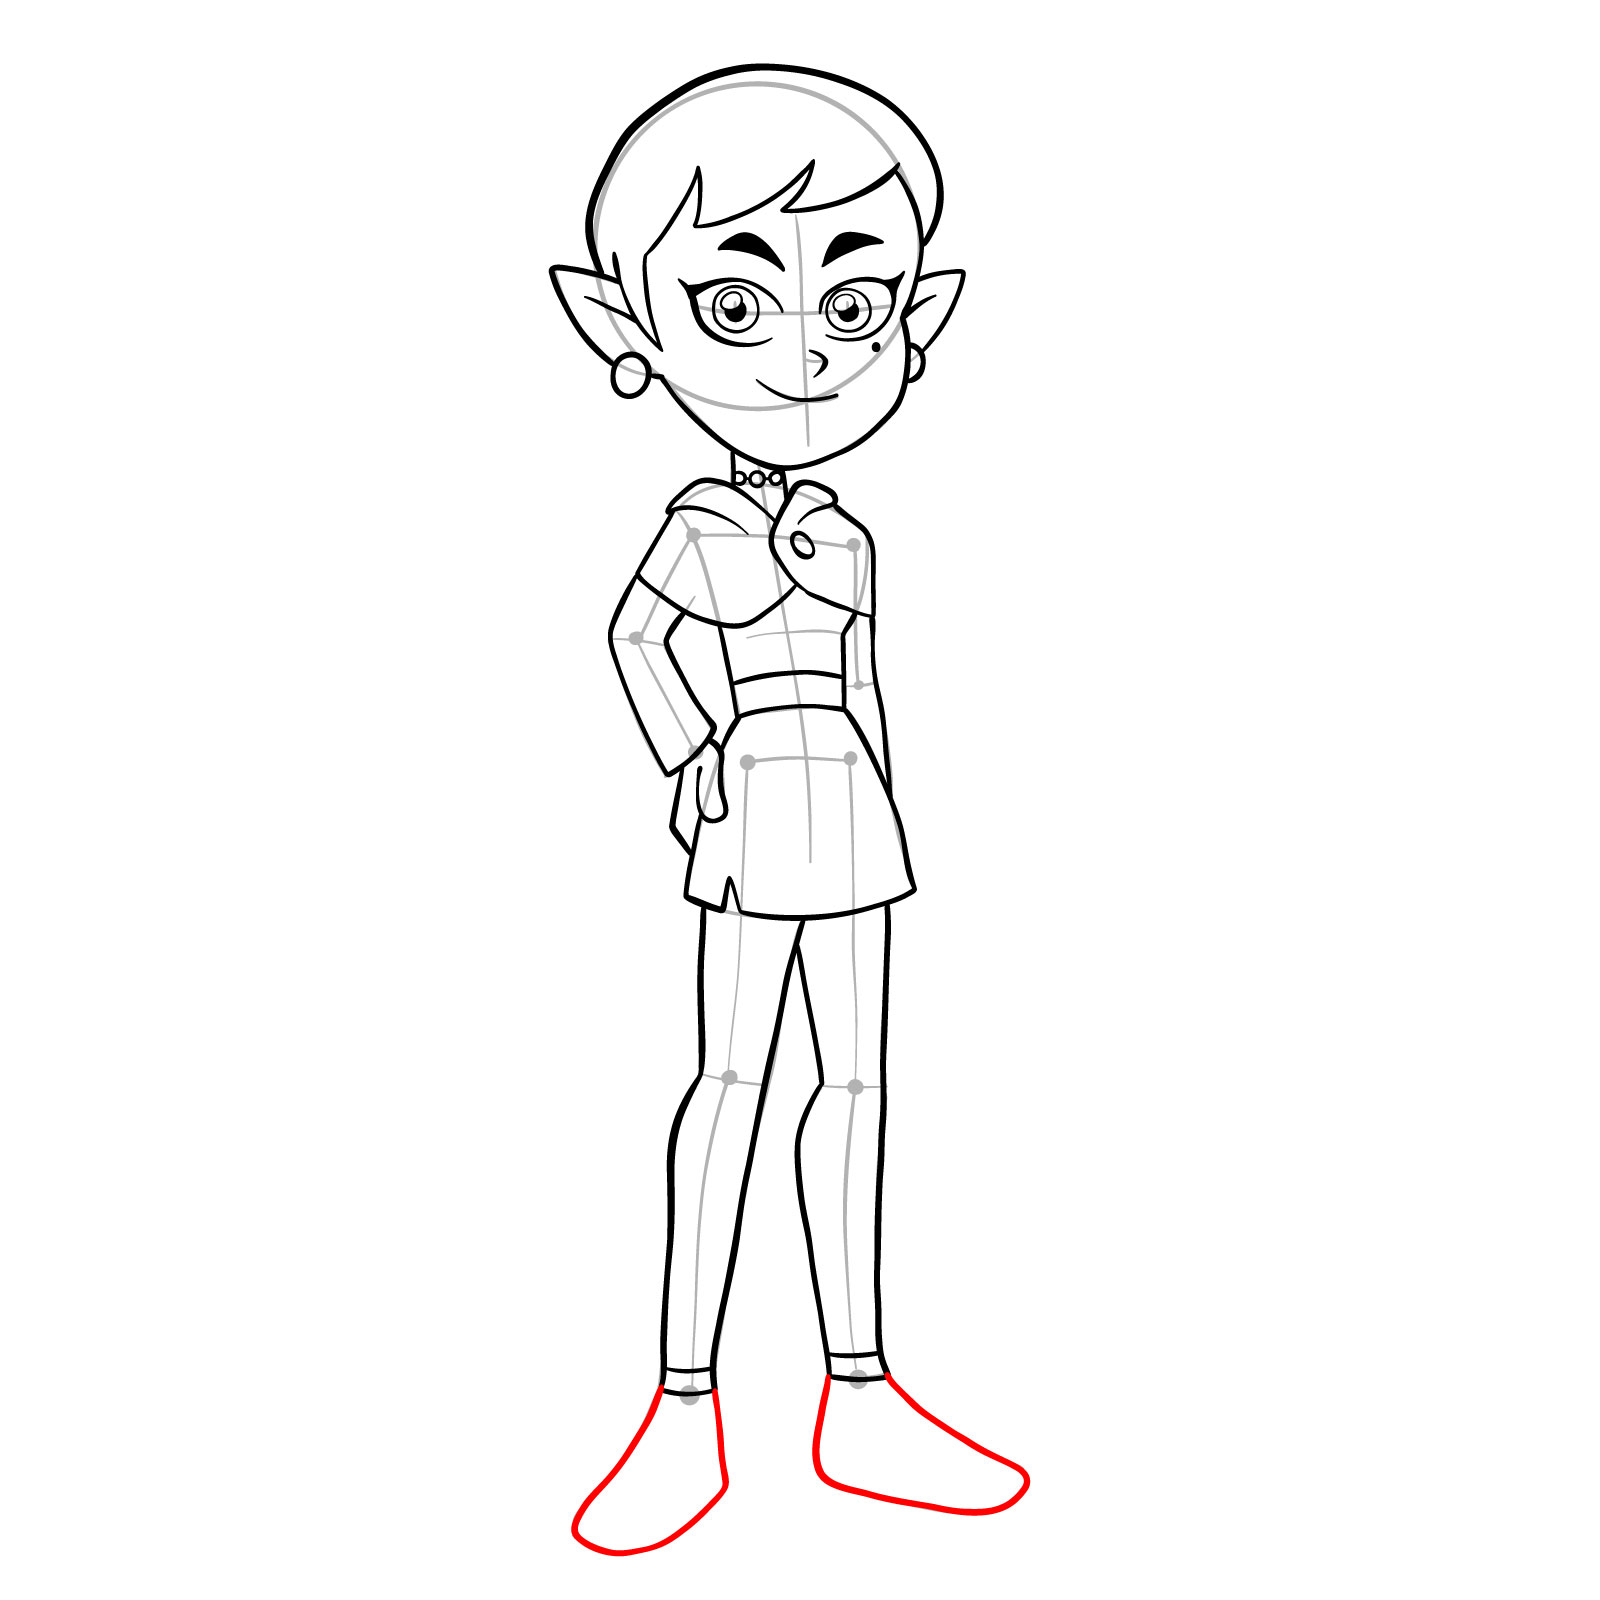 How to draw Emira Blight from The Owl House - step 22